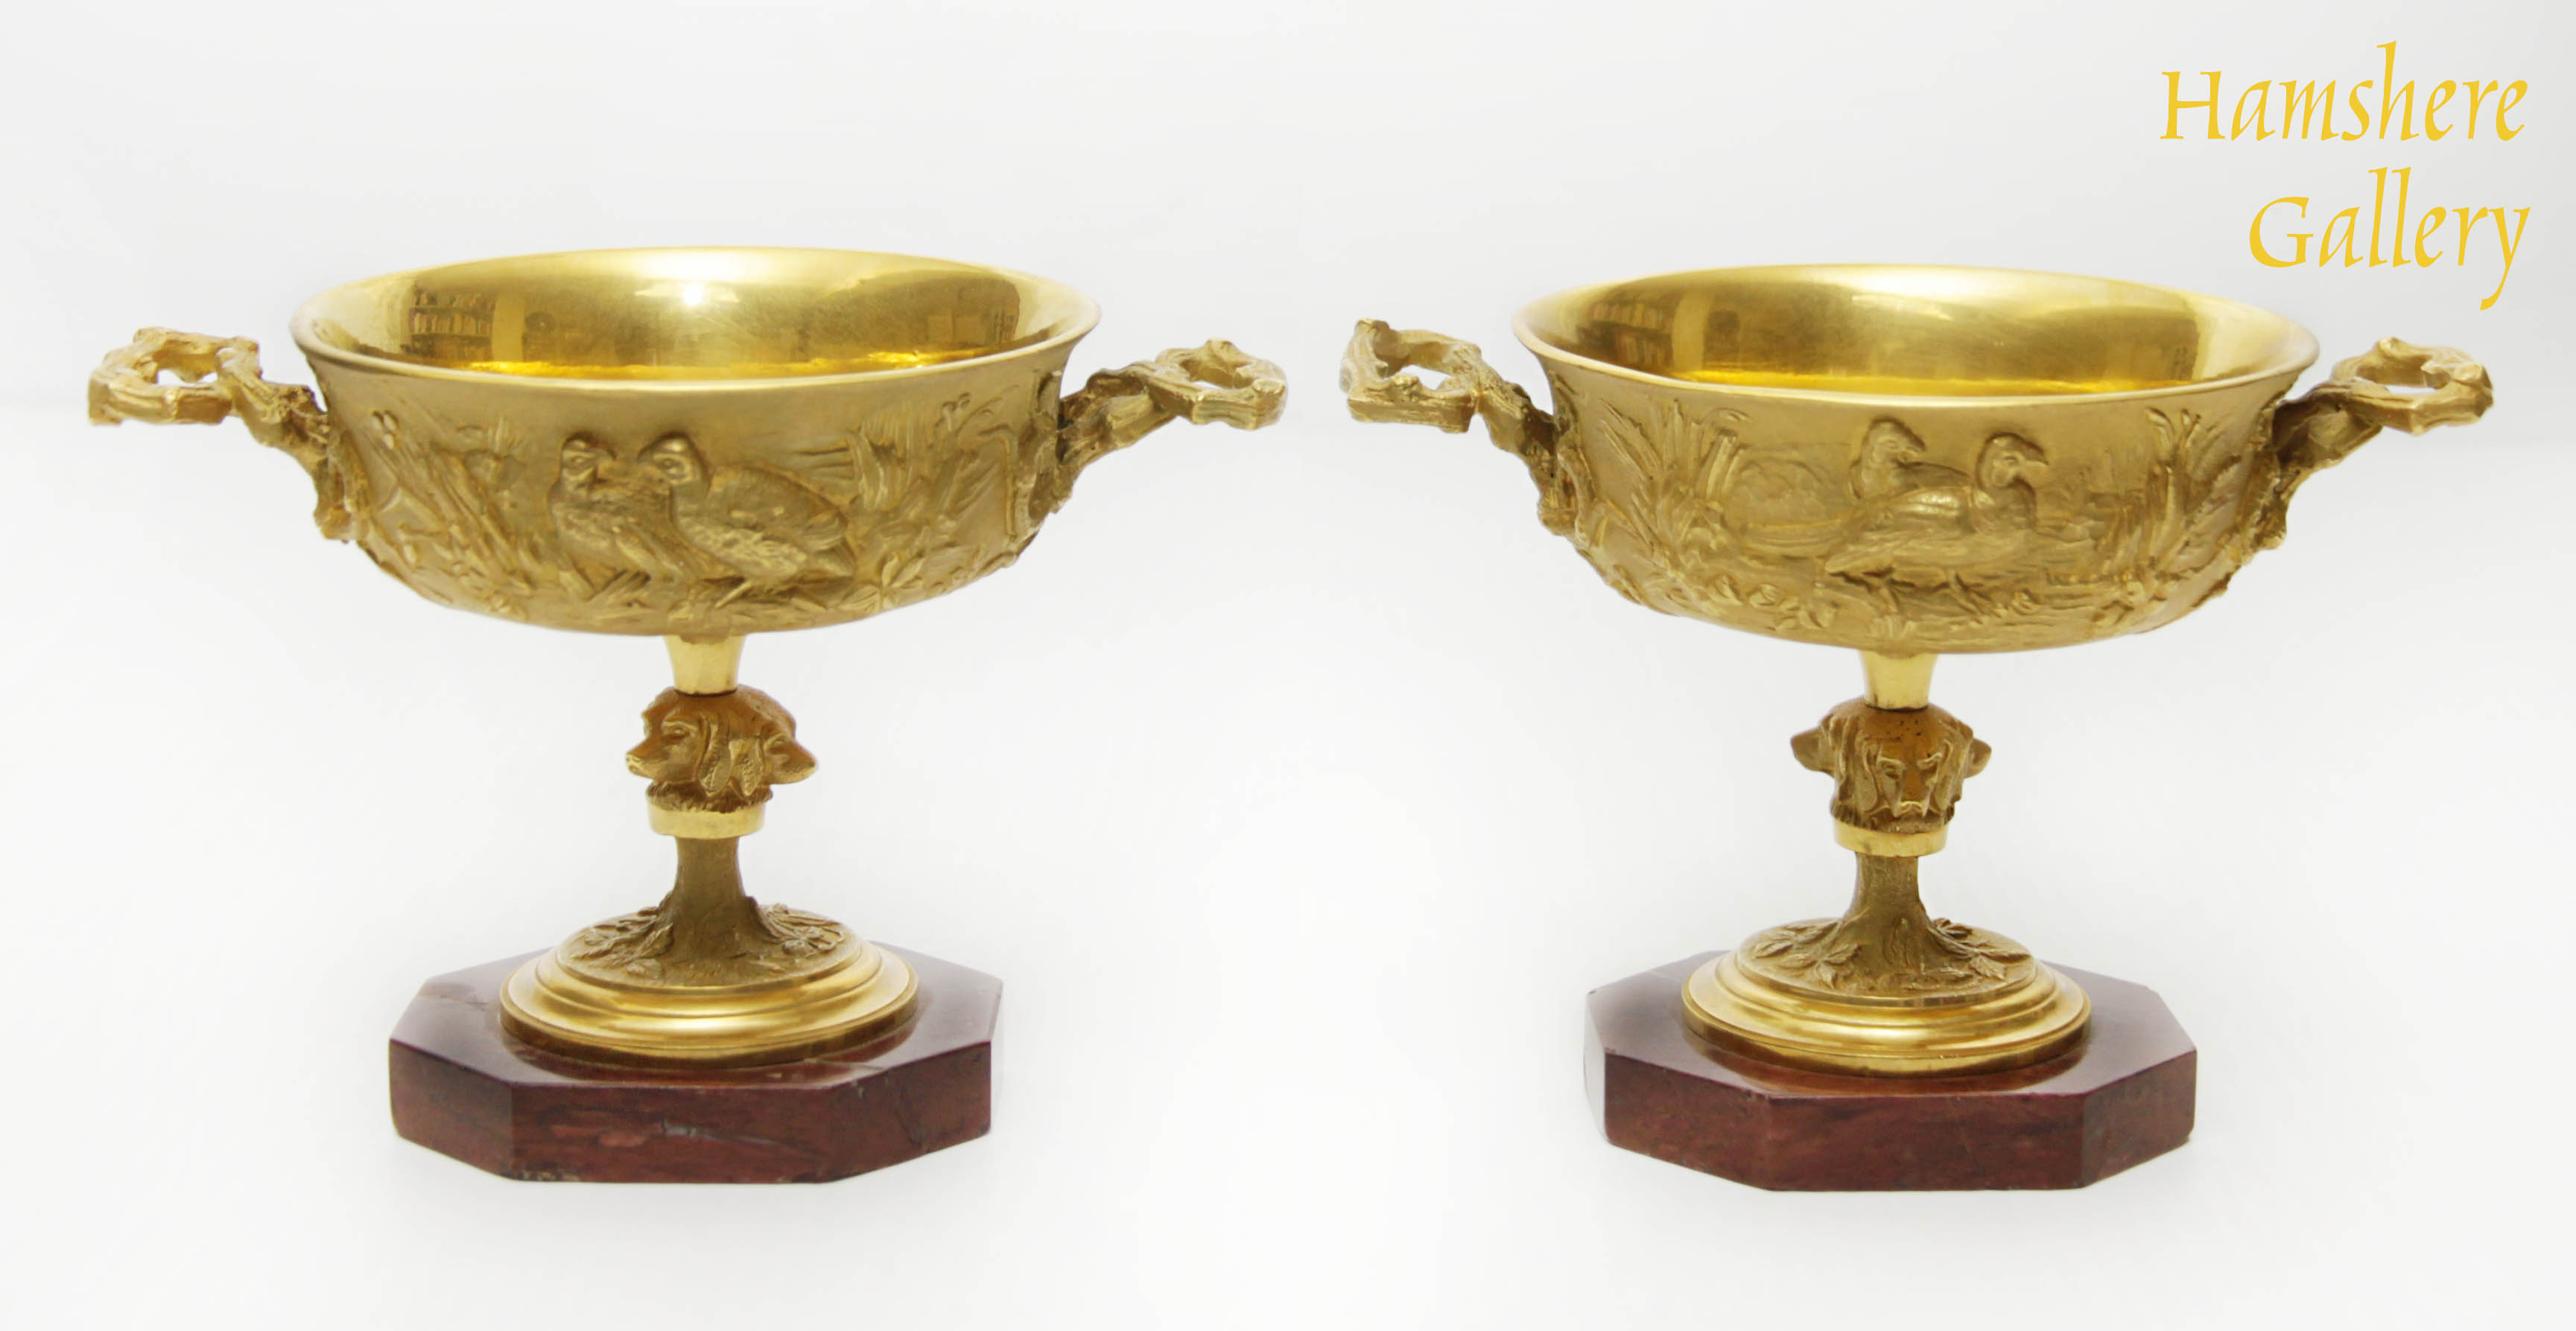 Click for larger image: A pair of bronze dore hunting / chasse, tazza / coupes of partridge, pheasants, Setter / hounds attributable to Christophe Fratin (French, 1800-1864) - A pair of bronze dore hunting / chasse, tazza / coupes of partridge, pheasants, Setter / hounds attributable to Christophe Fratin (French, 1800-1864)